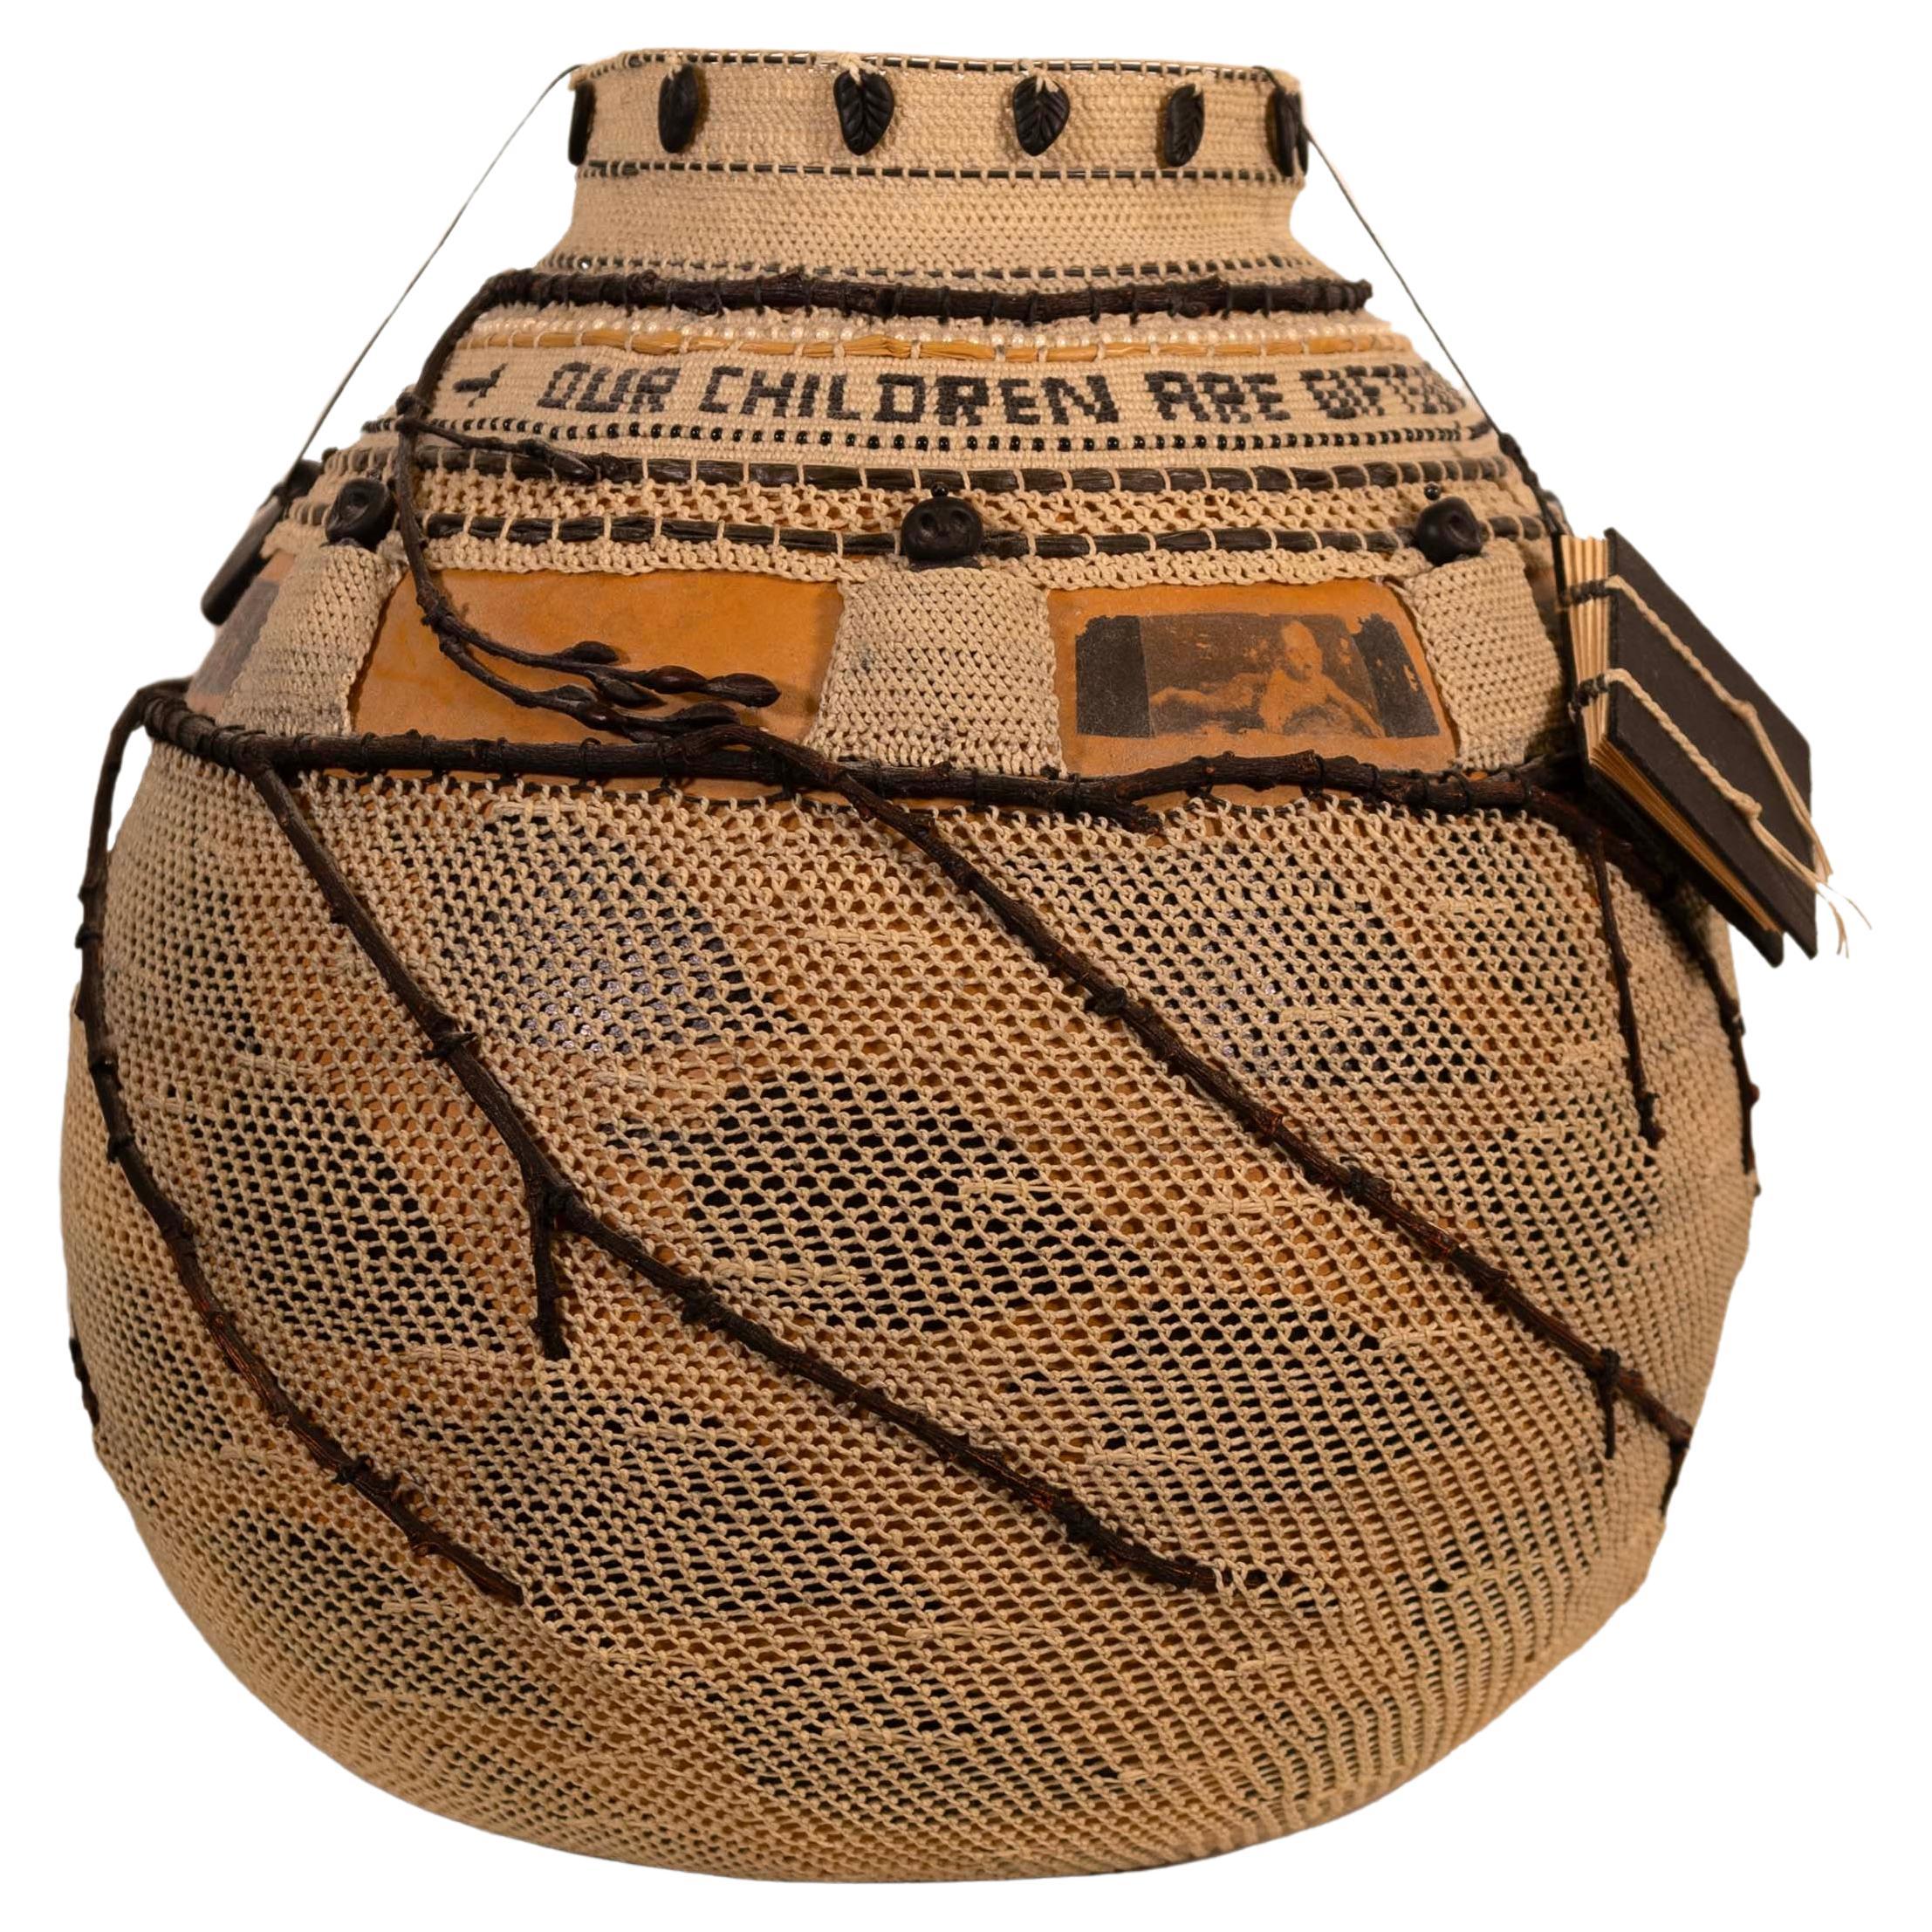 Judy Mulford Our Children are Gifts 1995 Contemporary Mixed Media Basket Fiber For Sale